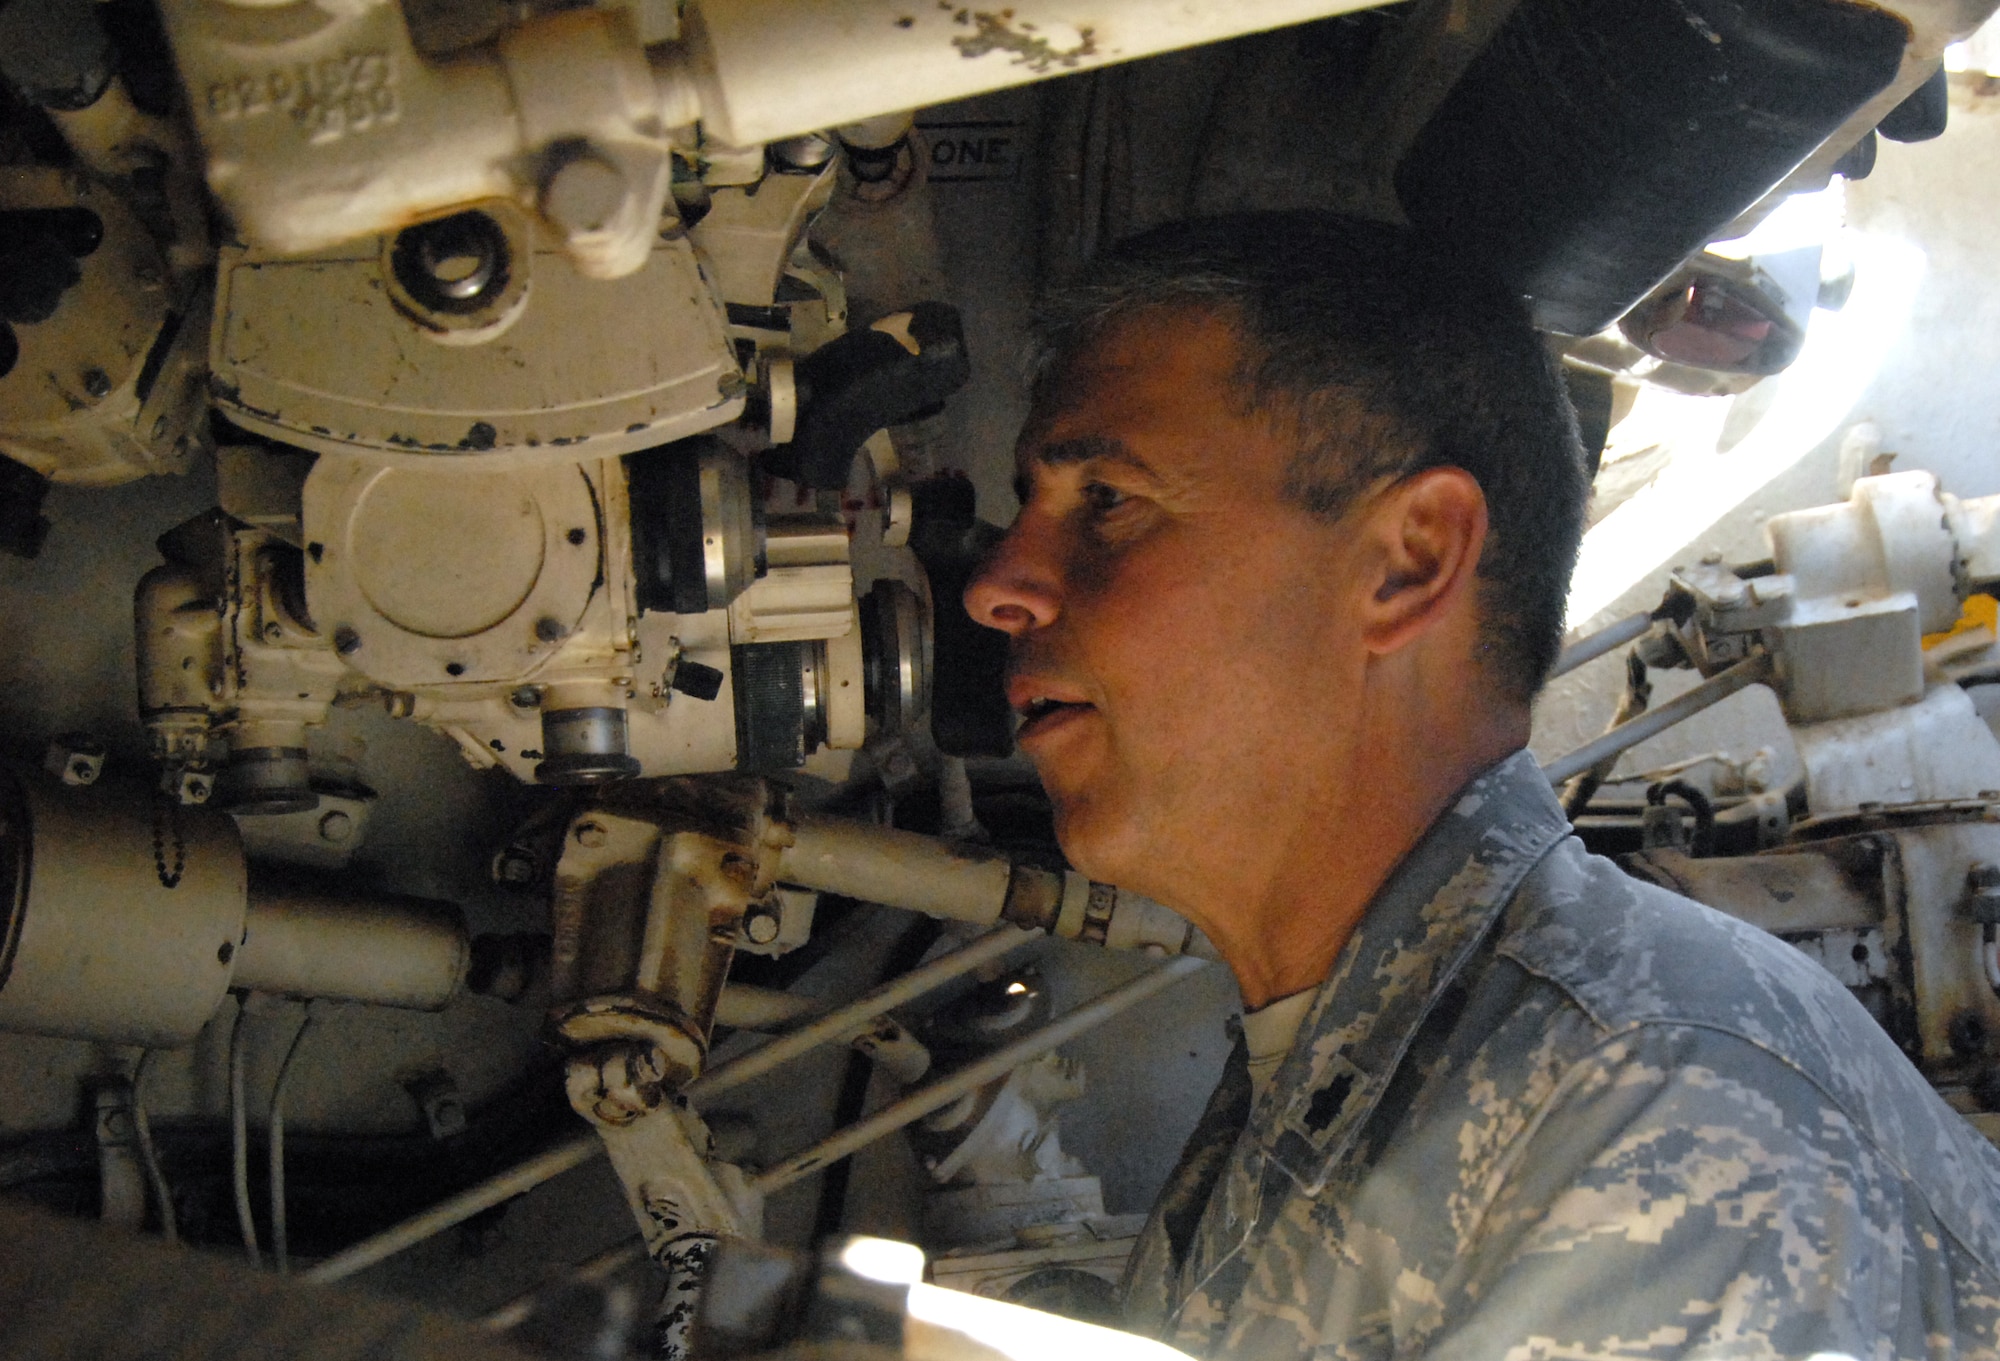 Lt. Col. Al Ozanian, 95th Medical Operations Squadron commander, checks some parts of an Army M60 tank. Colonel Ozanian received his Bachelor of Science in Psychology from Virginia State University in Petersburg, Va. He finished his Master of Science in Social Work from Virginia Commonwealth University in Richmond, Va., and then commissioned with the Air Force. (Air Force photo by Senior Airman Julius Delos Reyes)